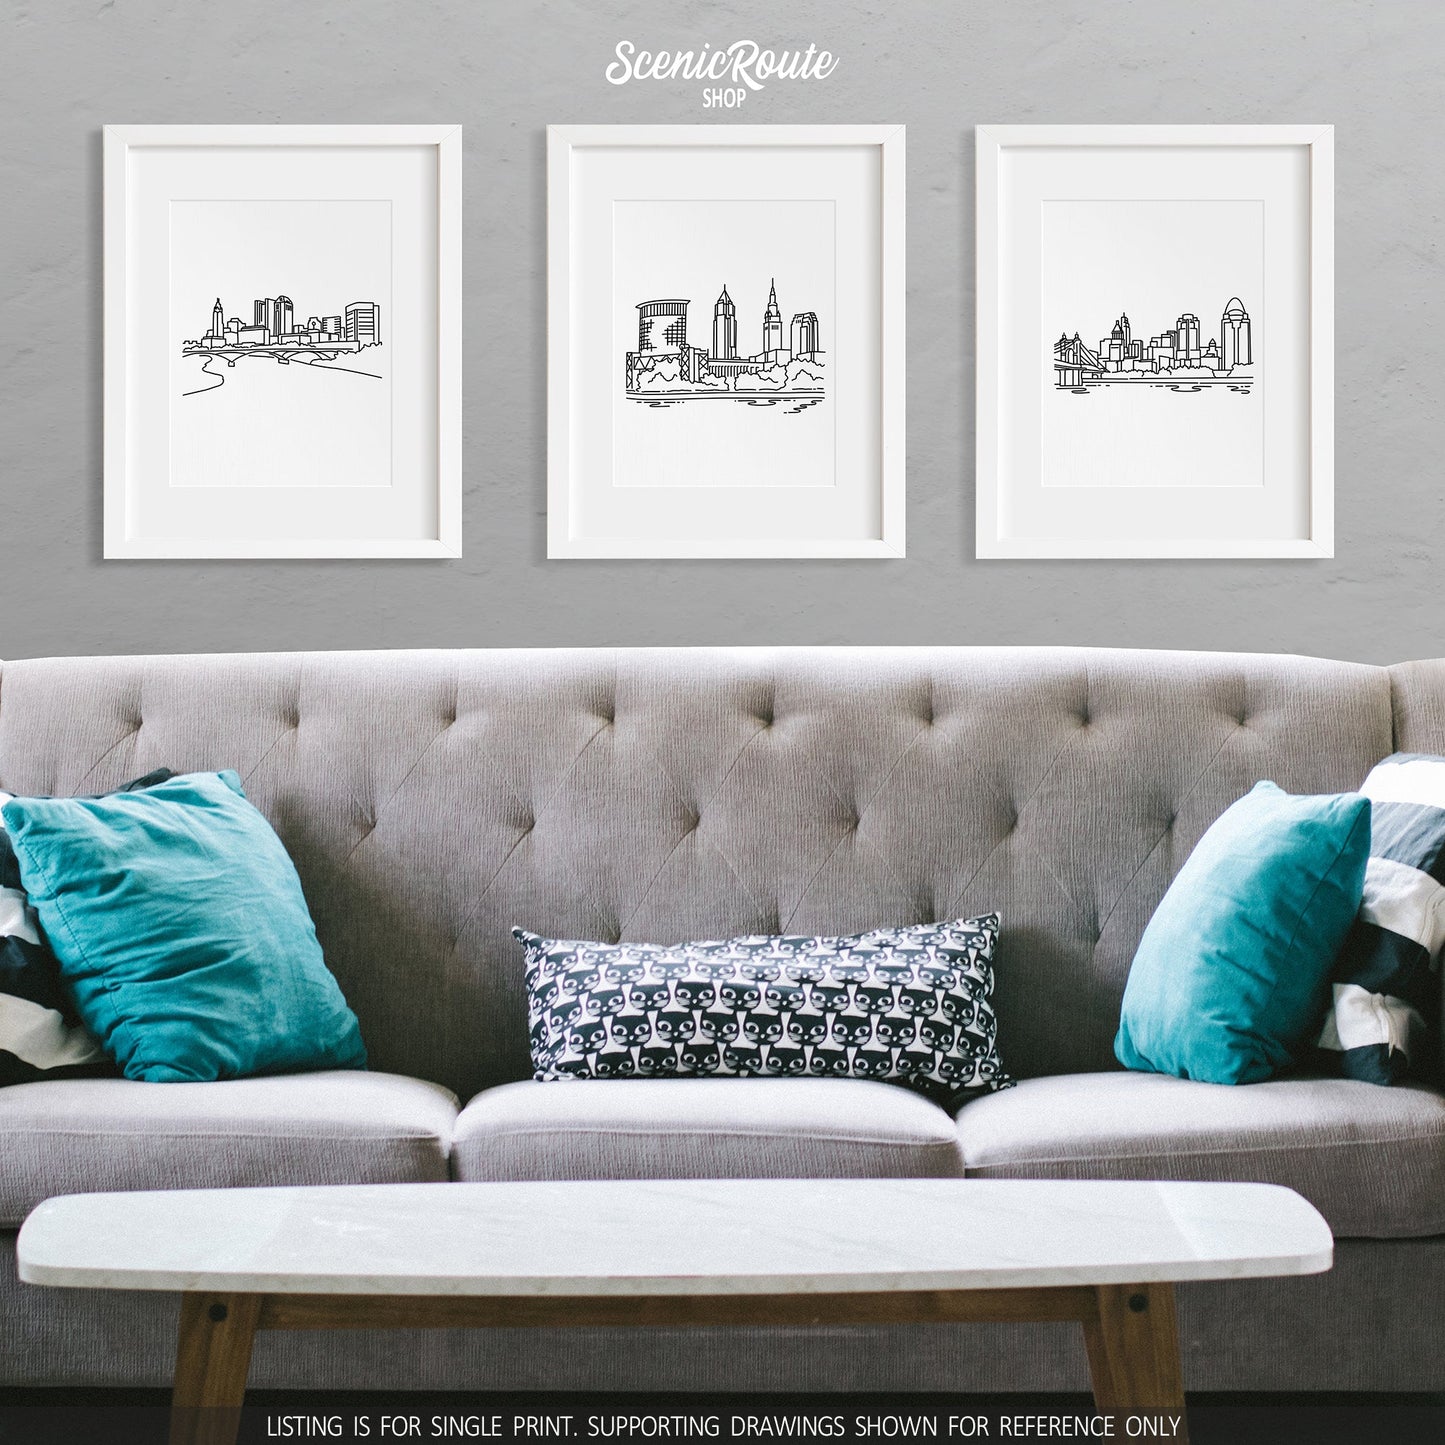 A group of three framed drawings on a wall above a couch with pillows. The line art drawings include the Columbus Skyline, Cleveland Skyline, and Cincinnati Skyline